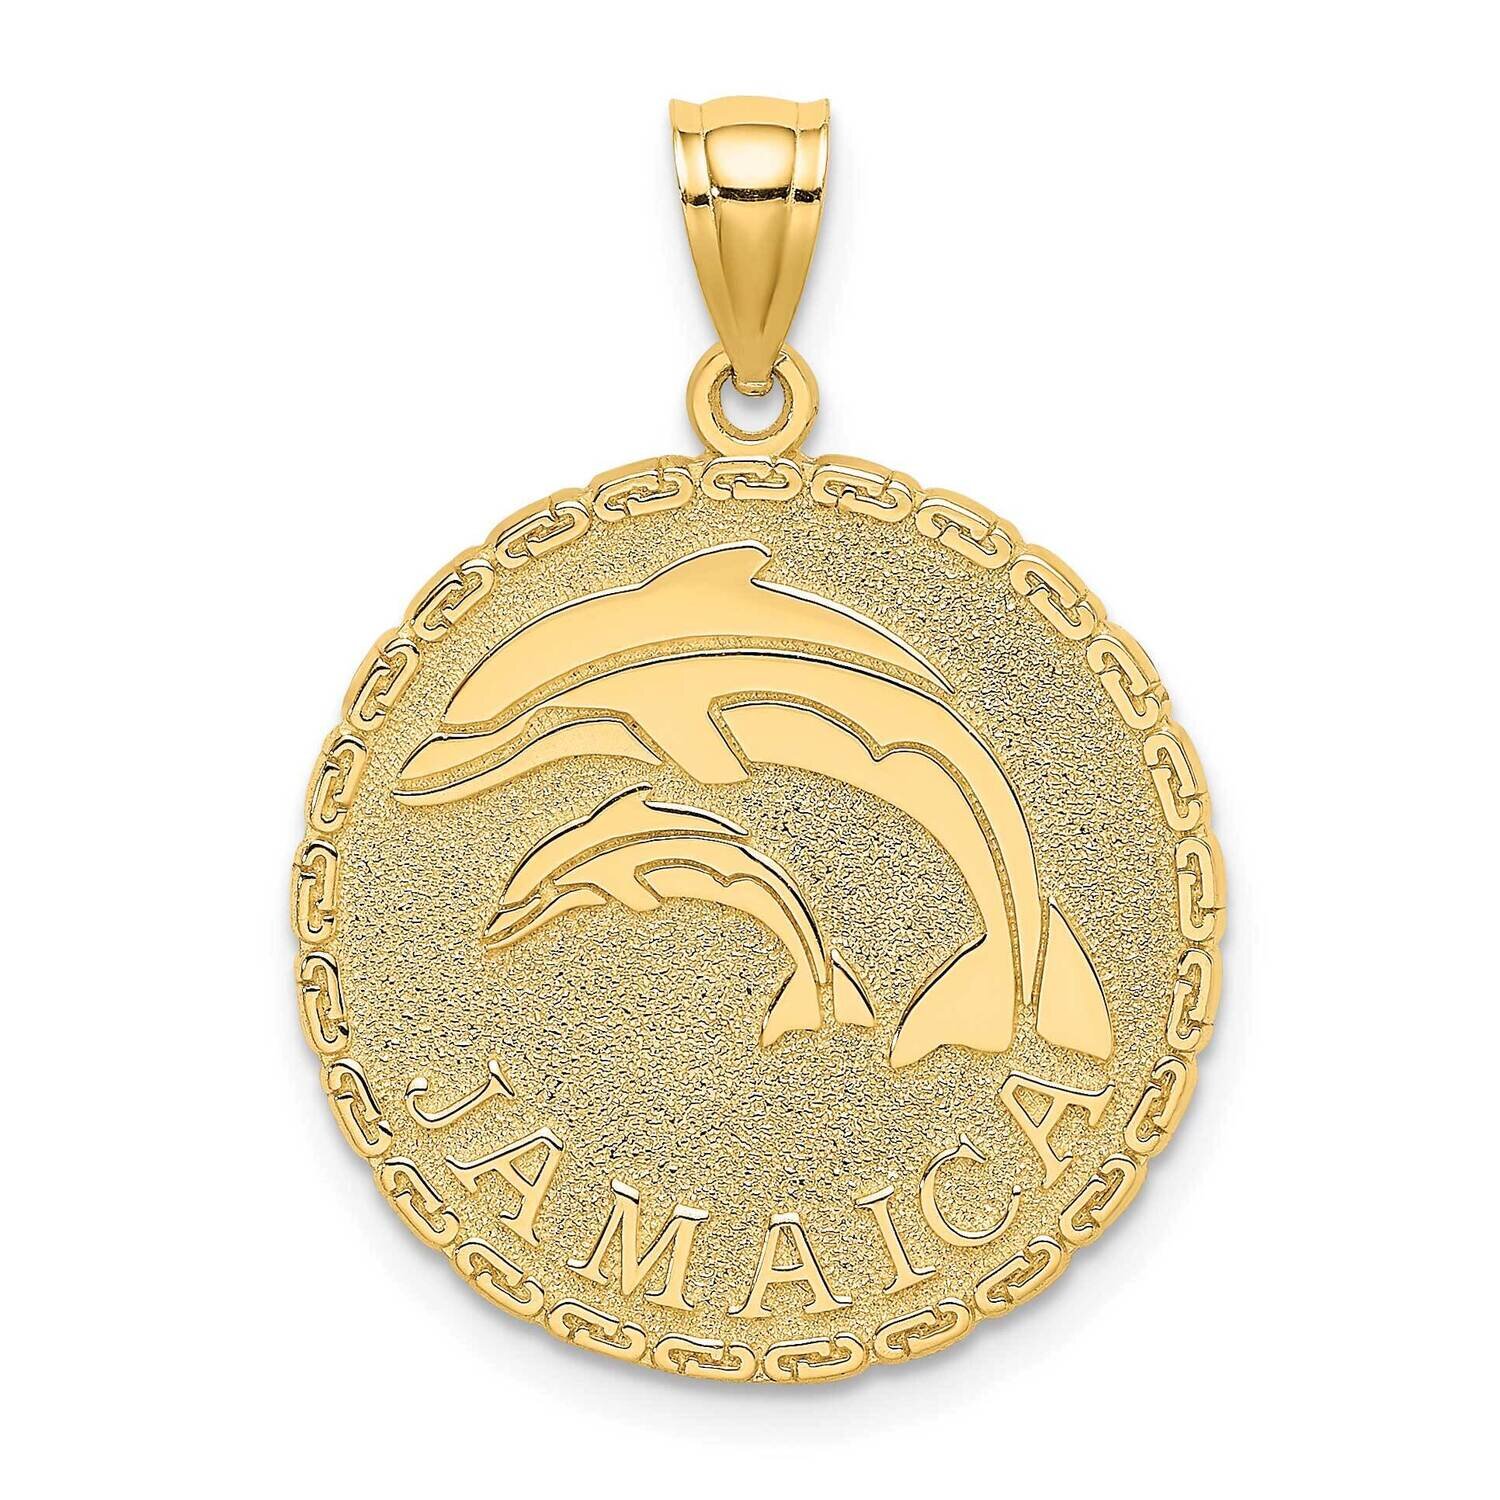 Jamaica Dolphins On Disk Charm 14k Gold K7518